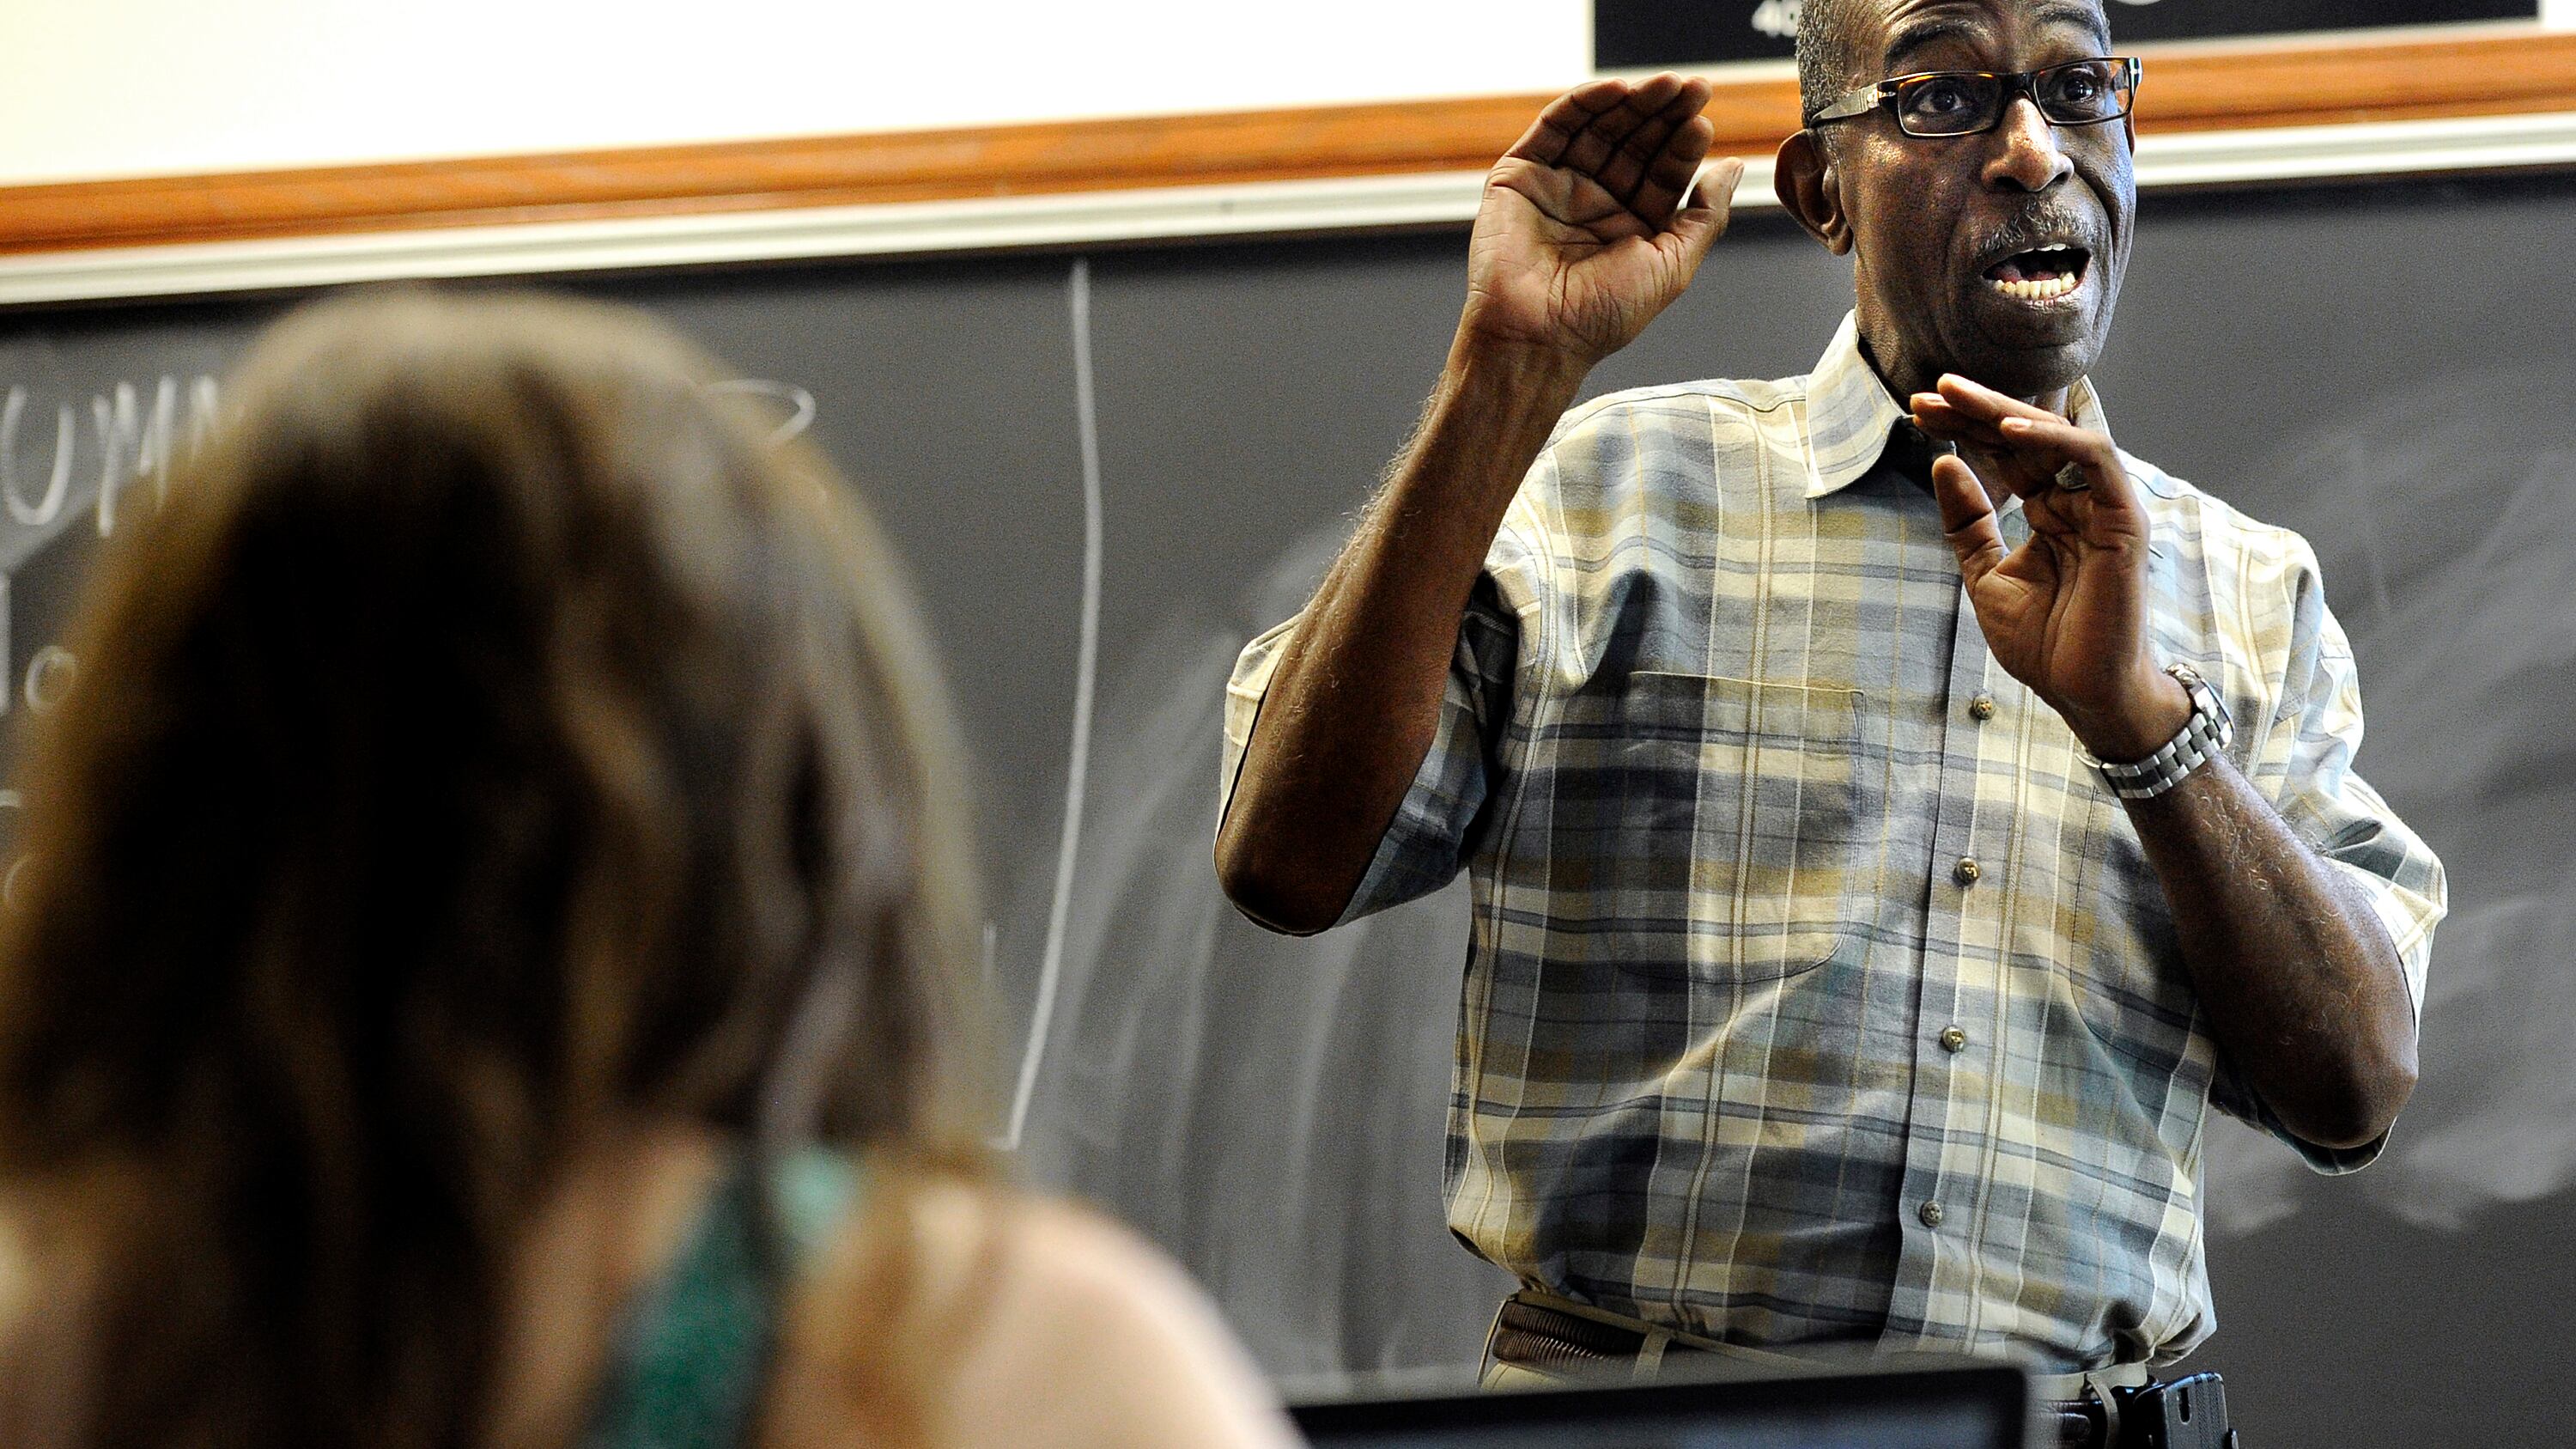 A teacher wearing a checkered shirt and glasses emphatically lectures as a student listens in the foreground.